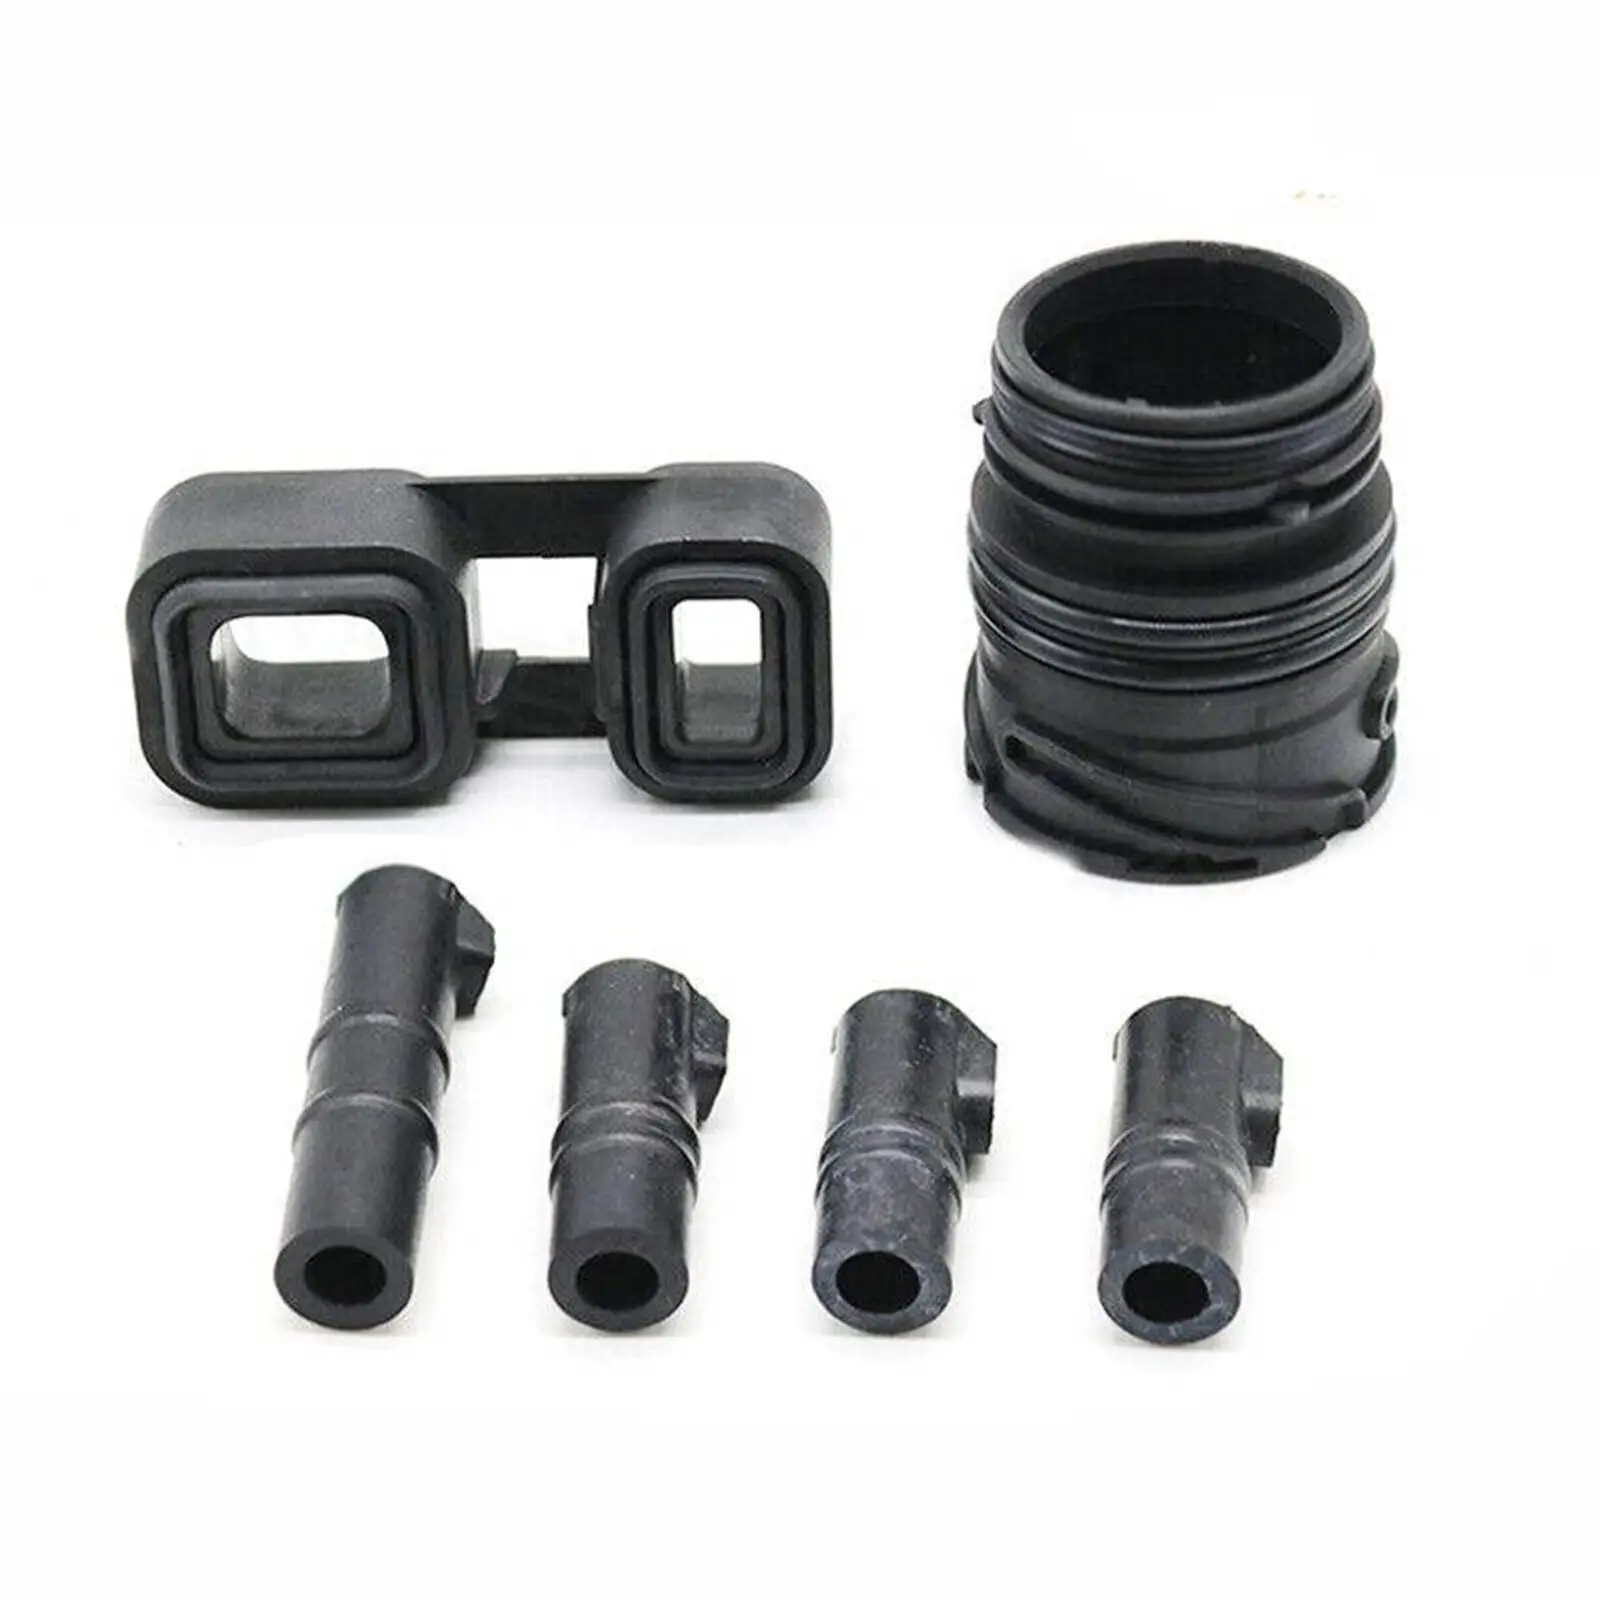 Sleeve and Adapter Seal Kit High Performance for BMW 1 Series x1, x3, x5, Z4, Zf Models with 6 Speed Zf 6HP26 3 Series